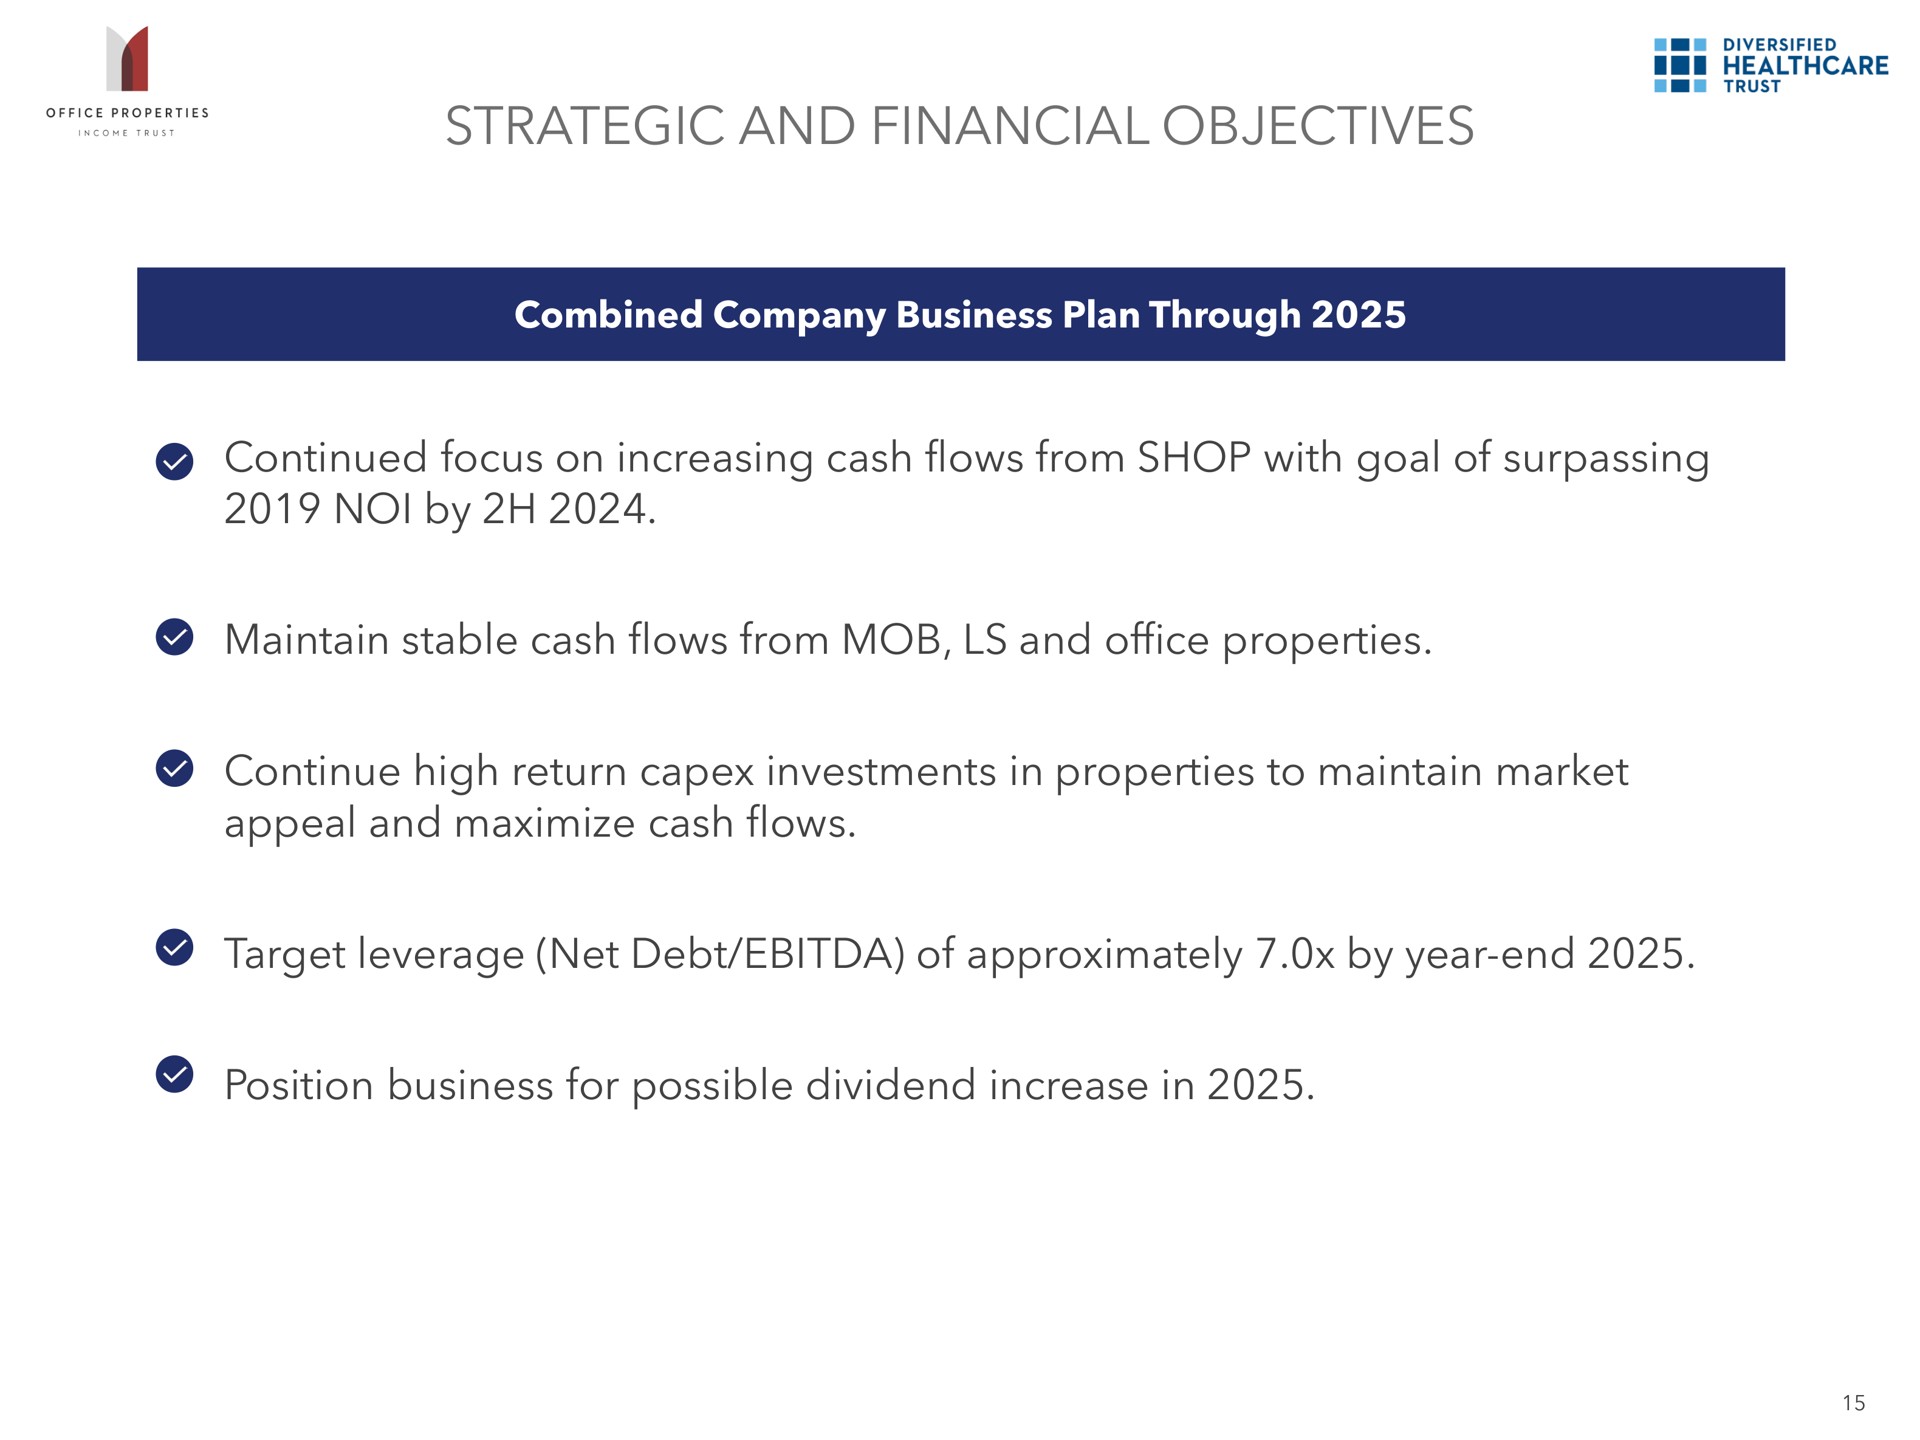 strategic and financial objectives continued focus on increasing cash flows from shop with goal of surpassing by maintain stable cash flows from mob and office properties continue high return investments in properties to maintain market appeal and maximize cash flows target leverage net debt of approximately by year end position business for possible dividend increase in veers a | Office Properties Income Trust